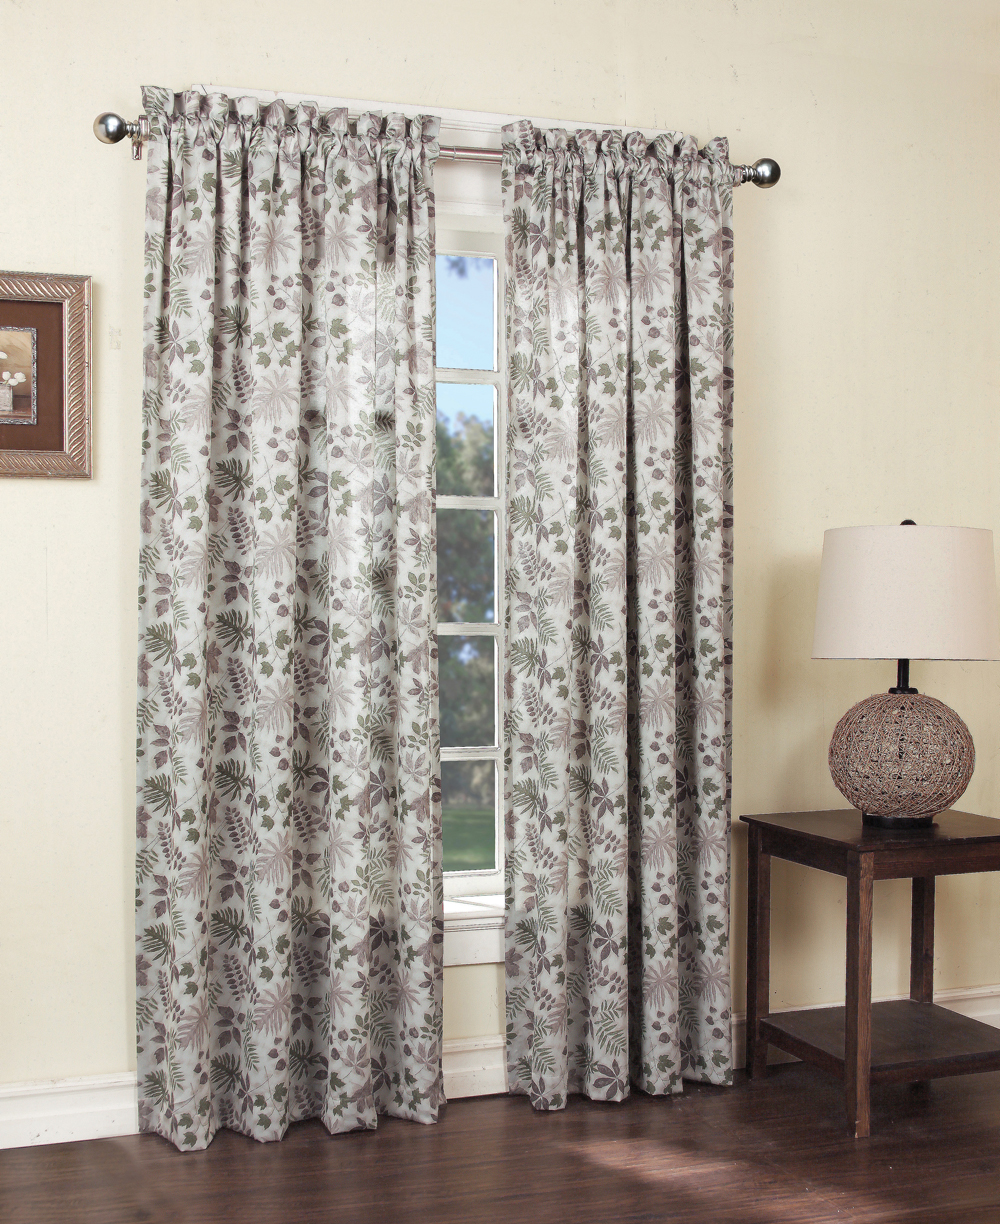 Country Curtains Locations in Curtain